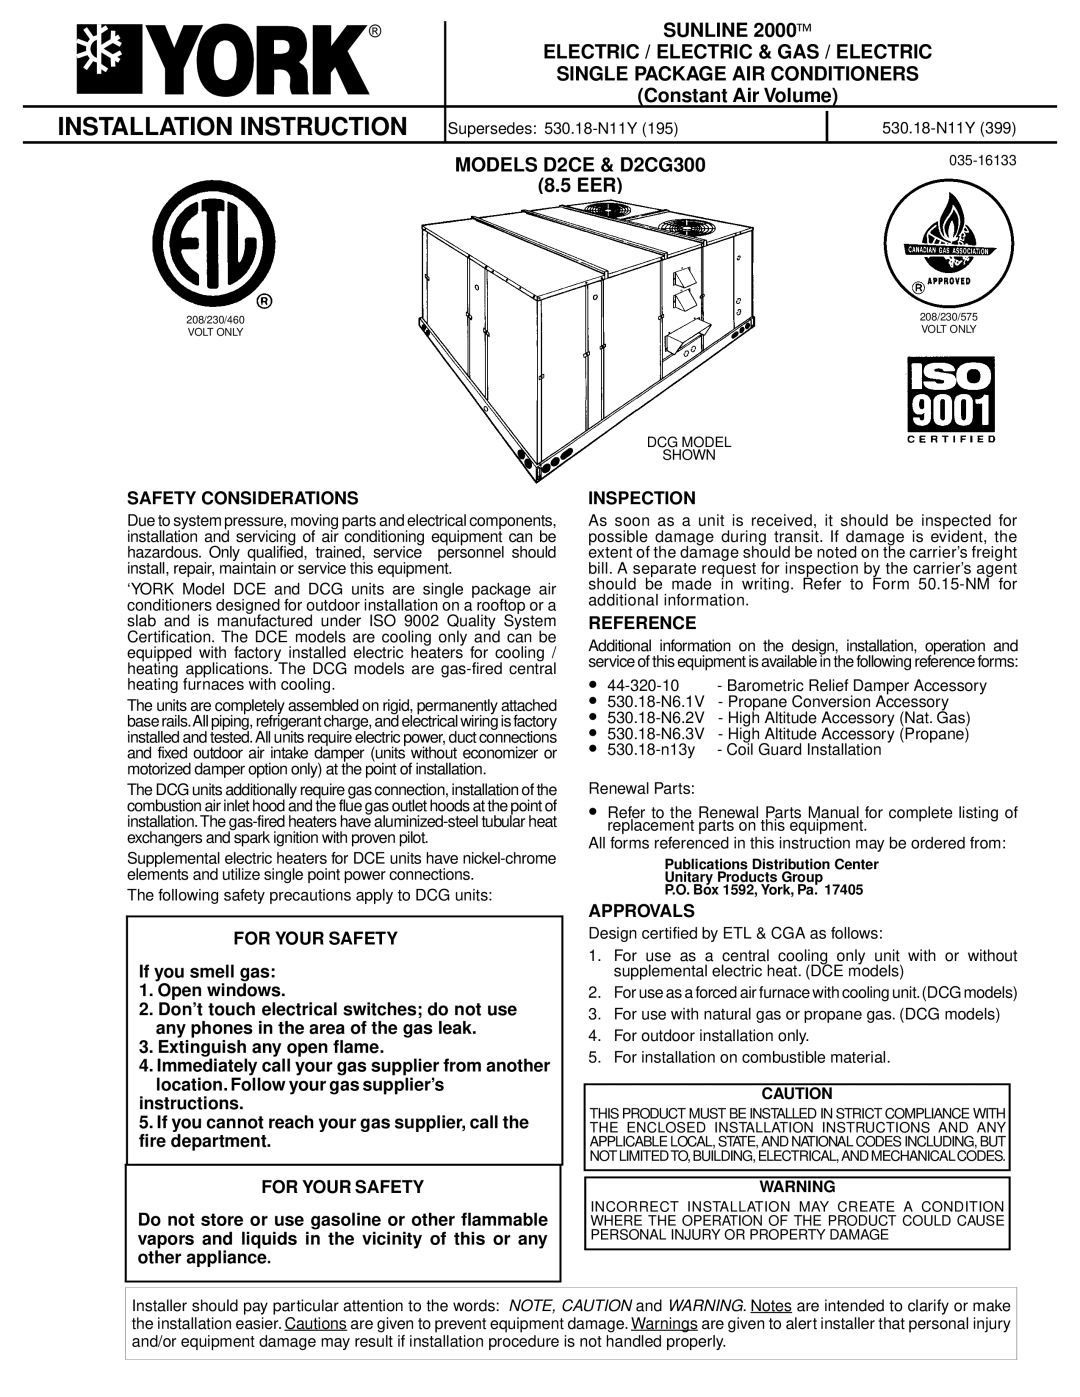 York D2CG300 installation instructions Installation Instruction, Safety Considerations, Extinguish any open flame, 8.5 EER 